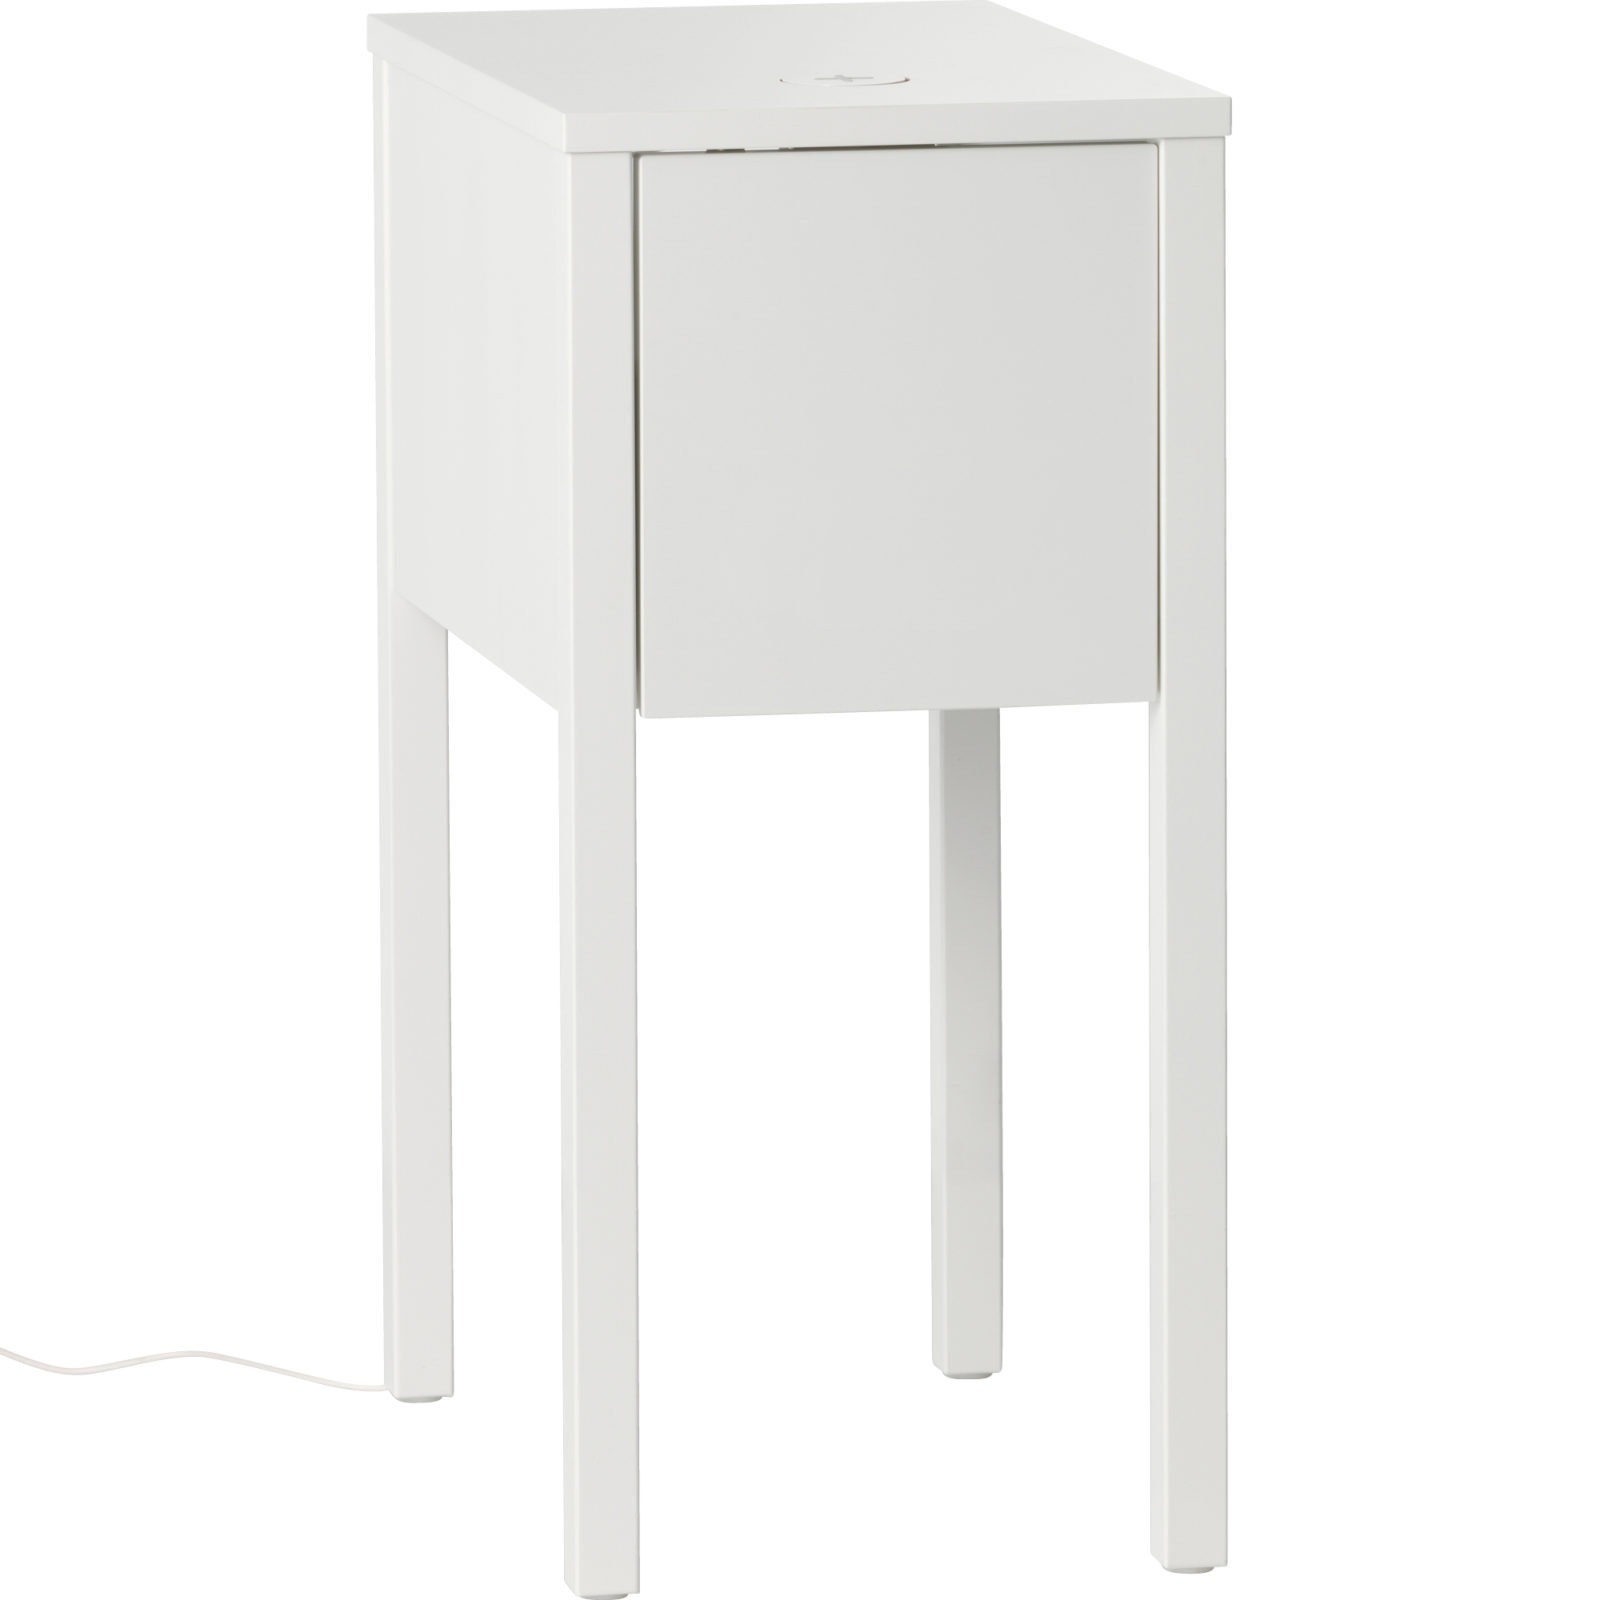 Simple bedside table made of white wood, NORDLI.